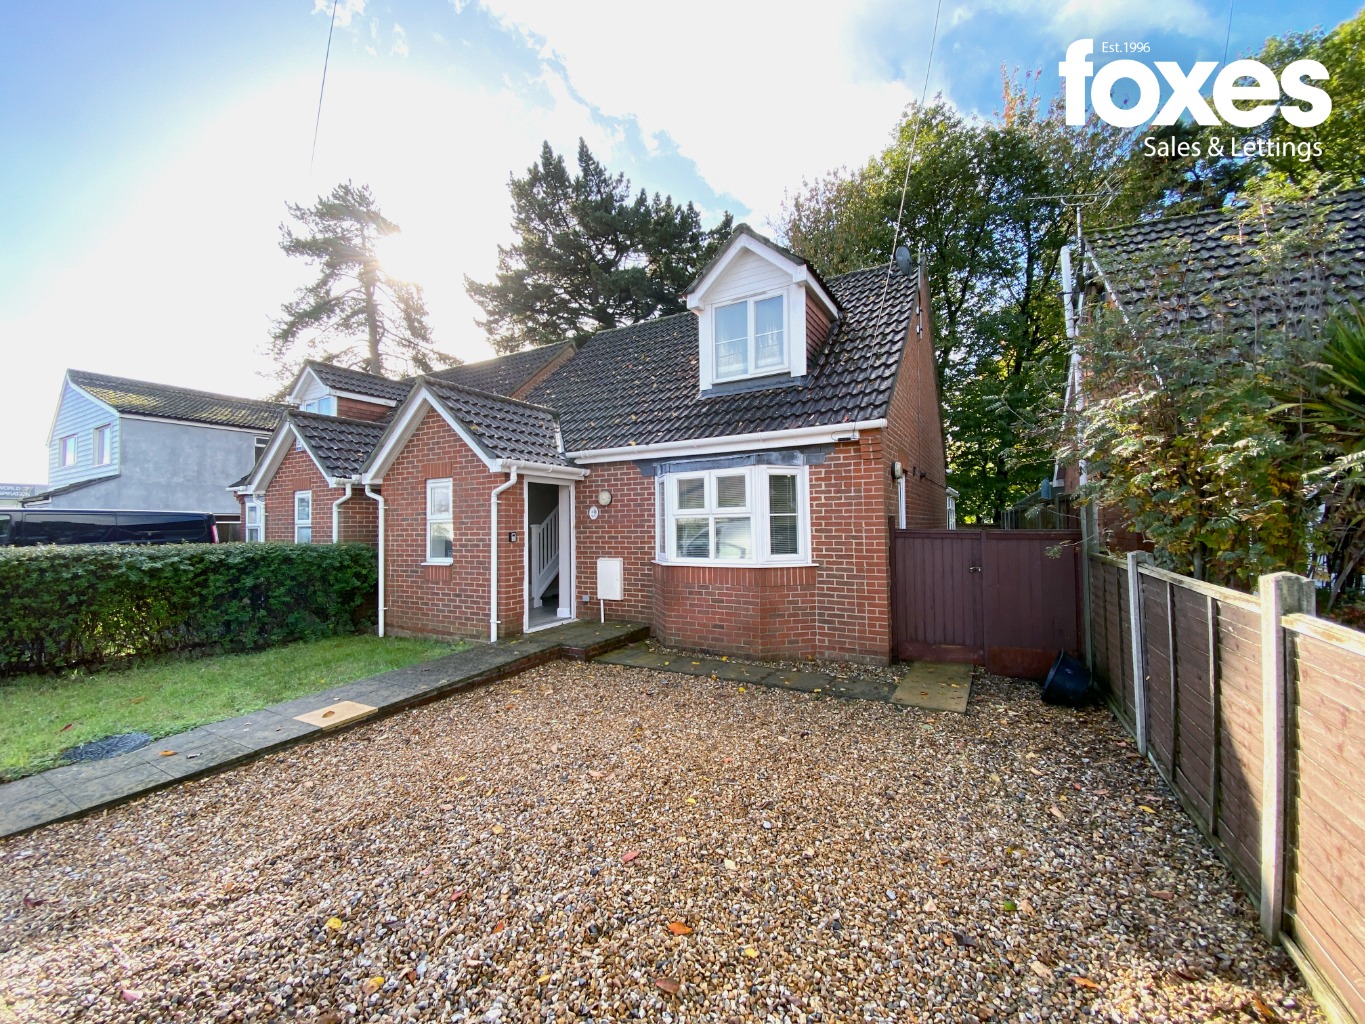 3 bed detached house for sale in Francis Avenue, Bournemouth - Property Image 1